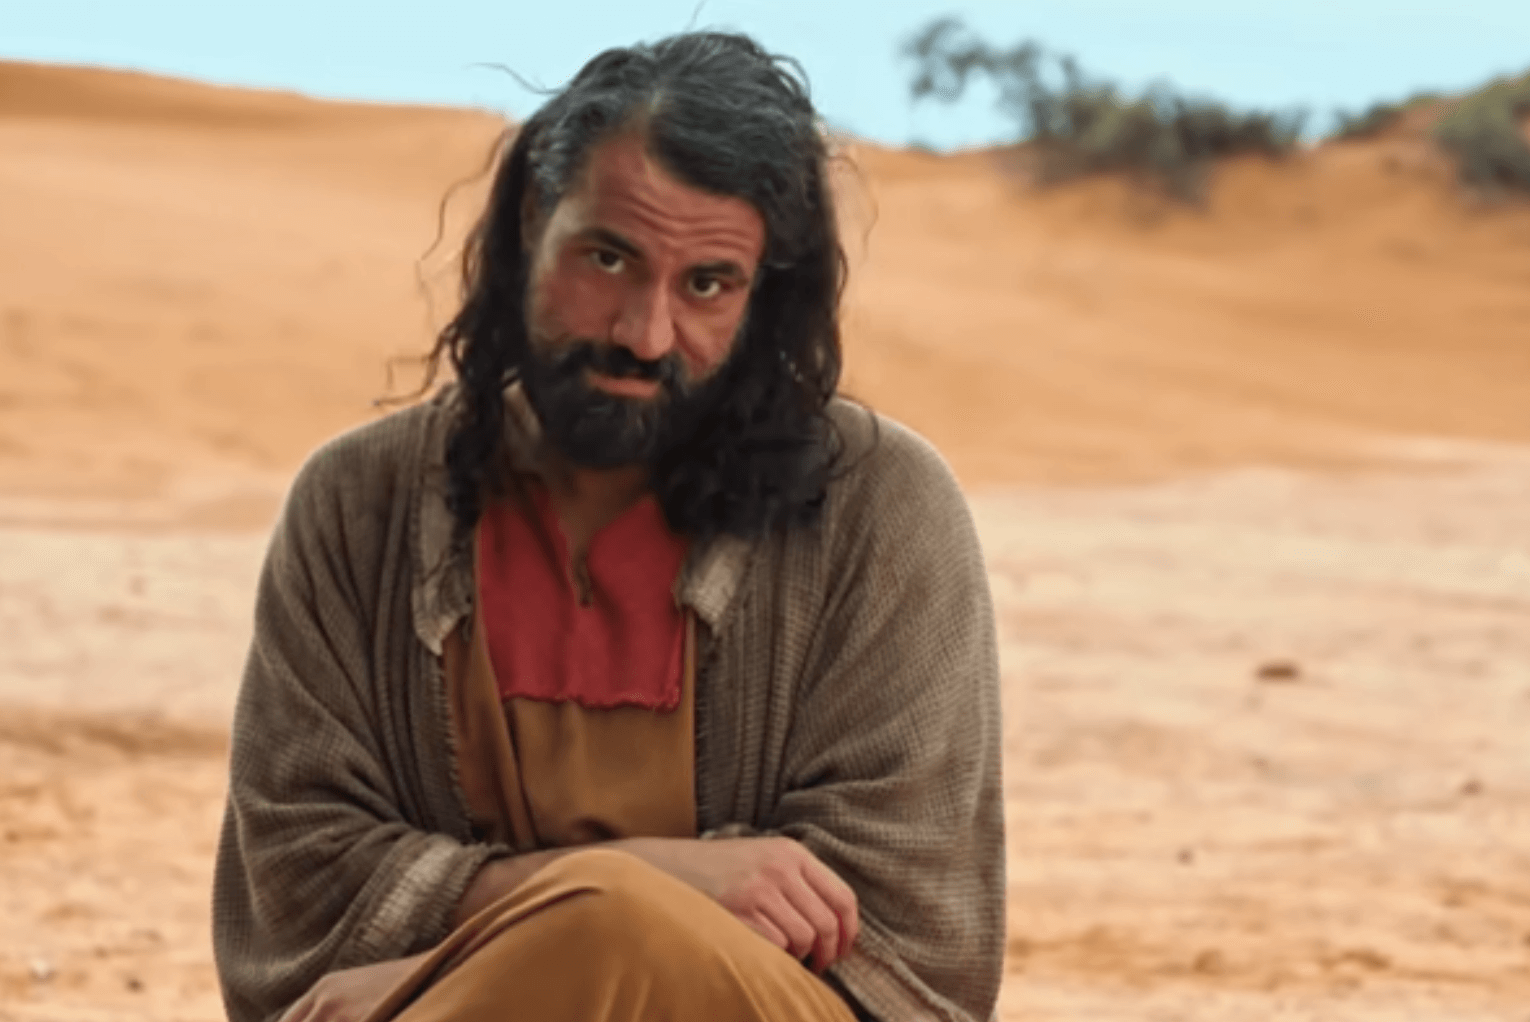 New Series Uses ‘The Office’ Comedy to Tell Moses’ Story